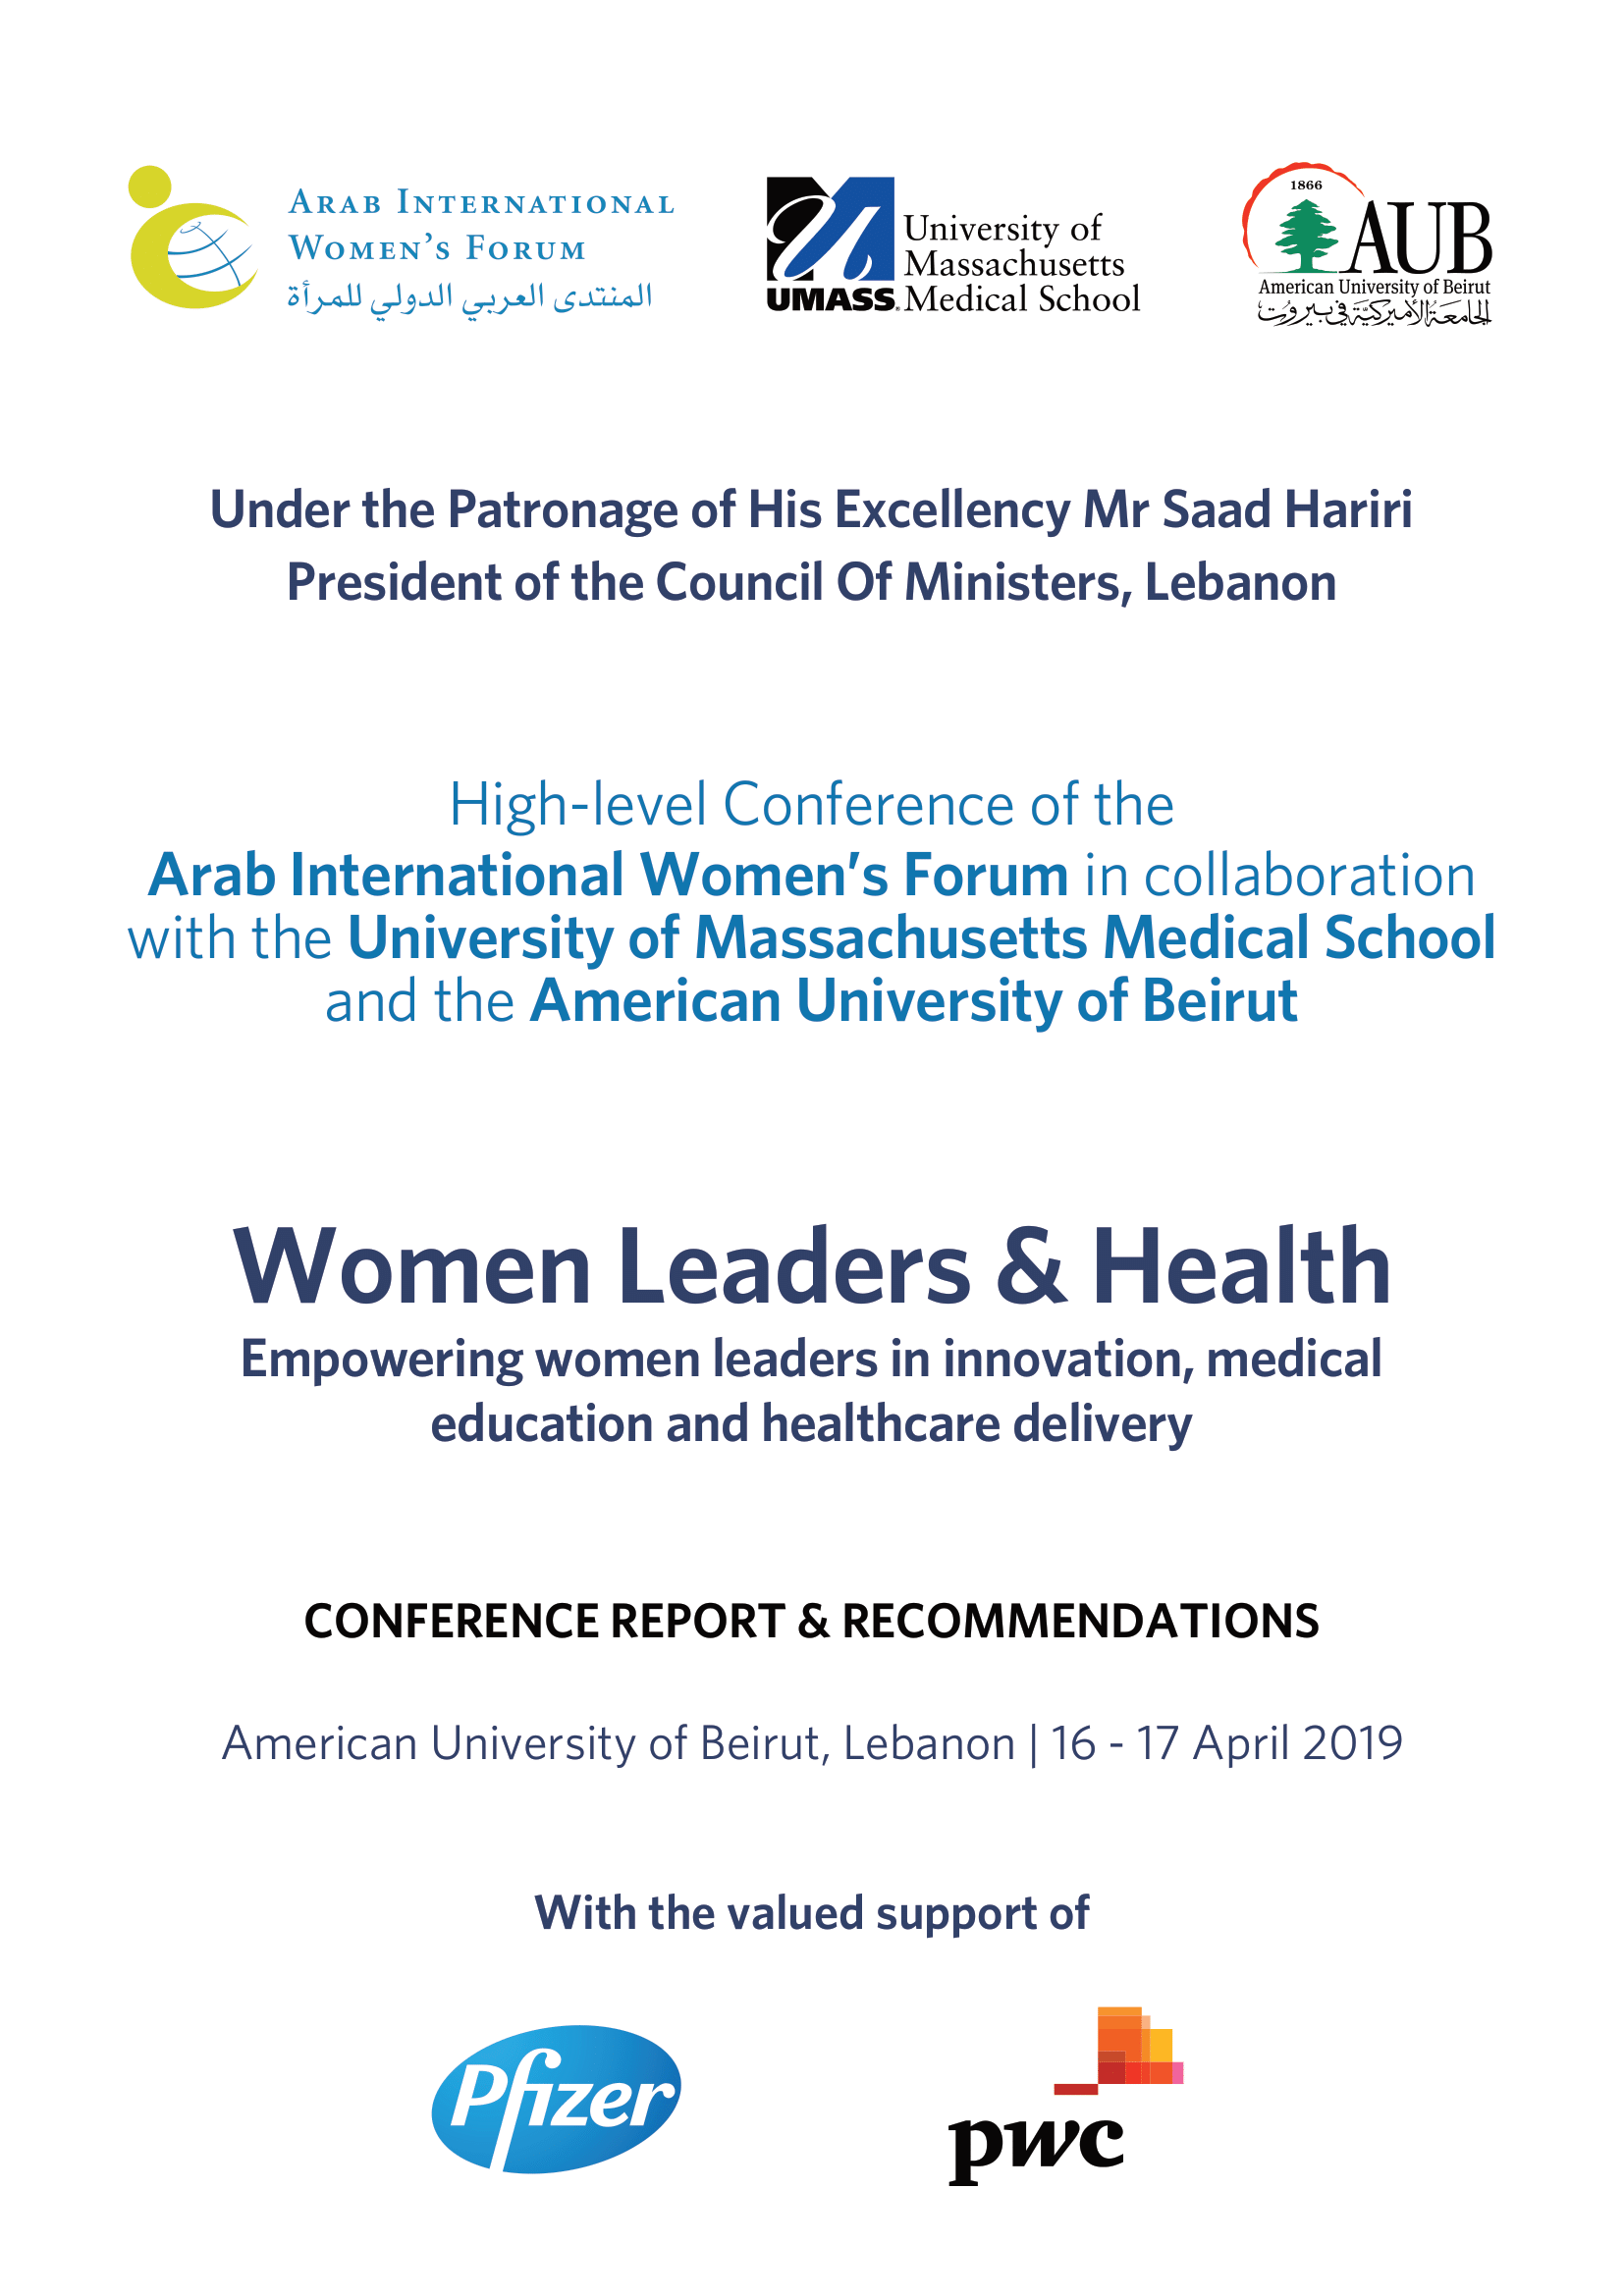 Women Leaders & Health Special Report & Recommendations (Beirut, April 2019)